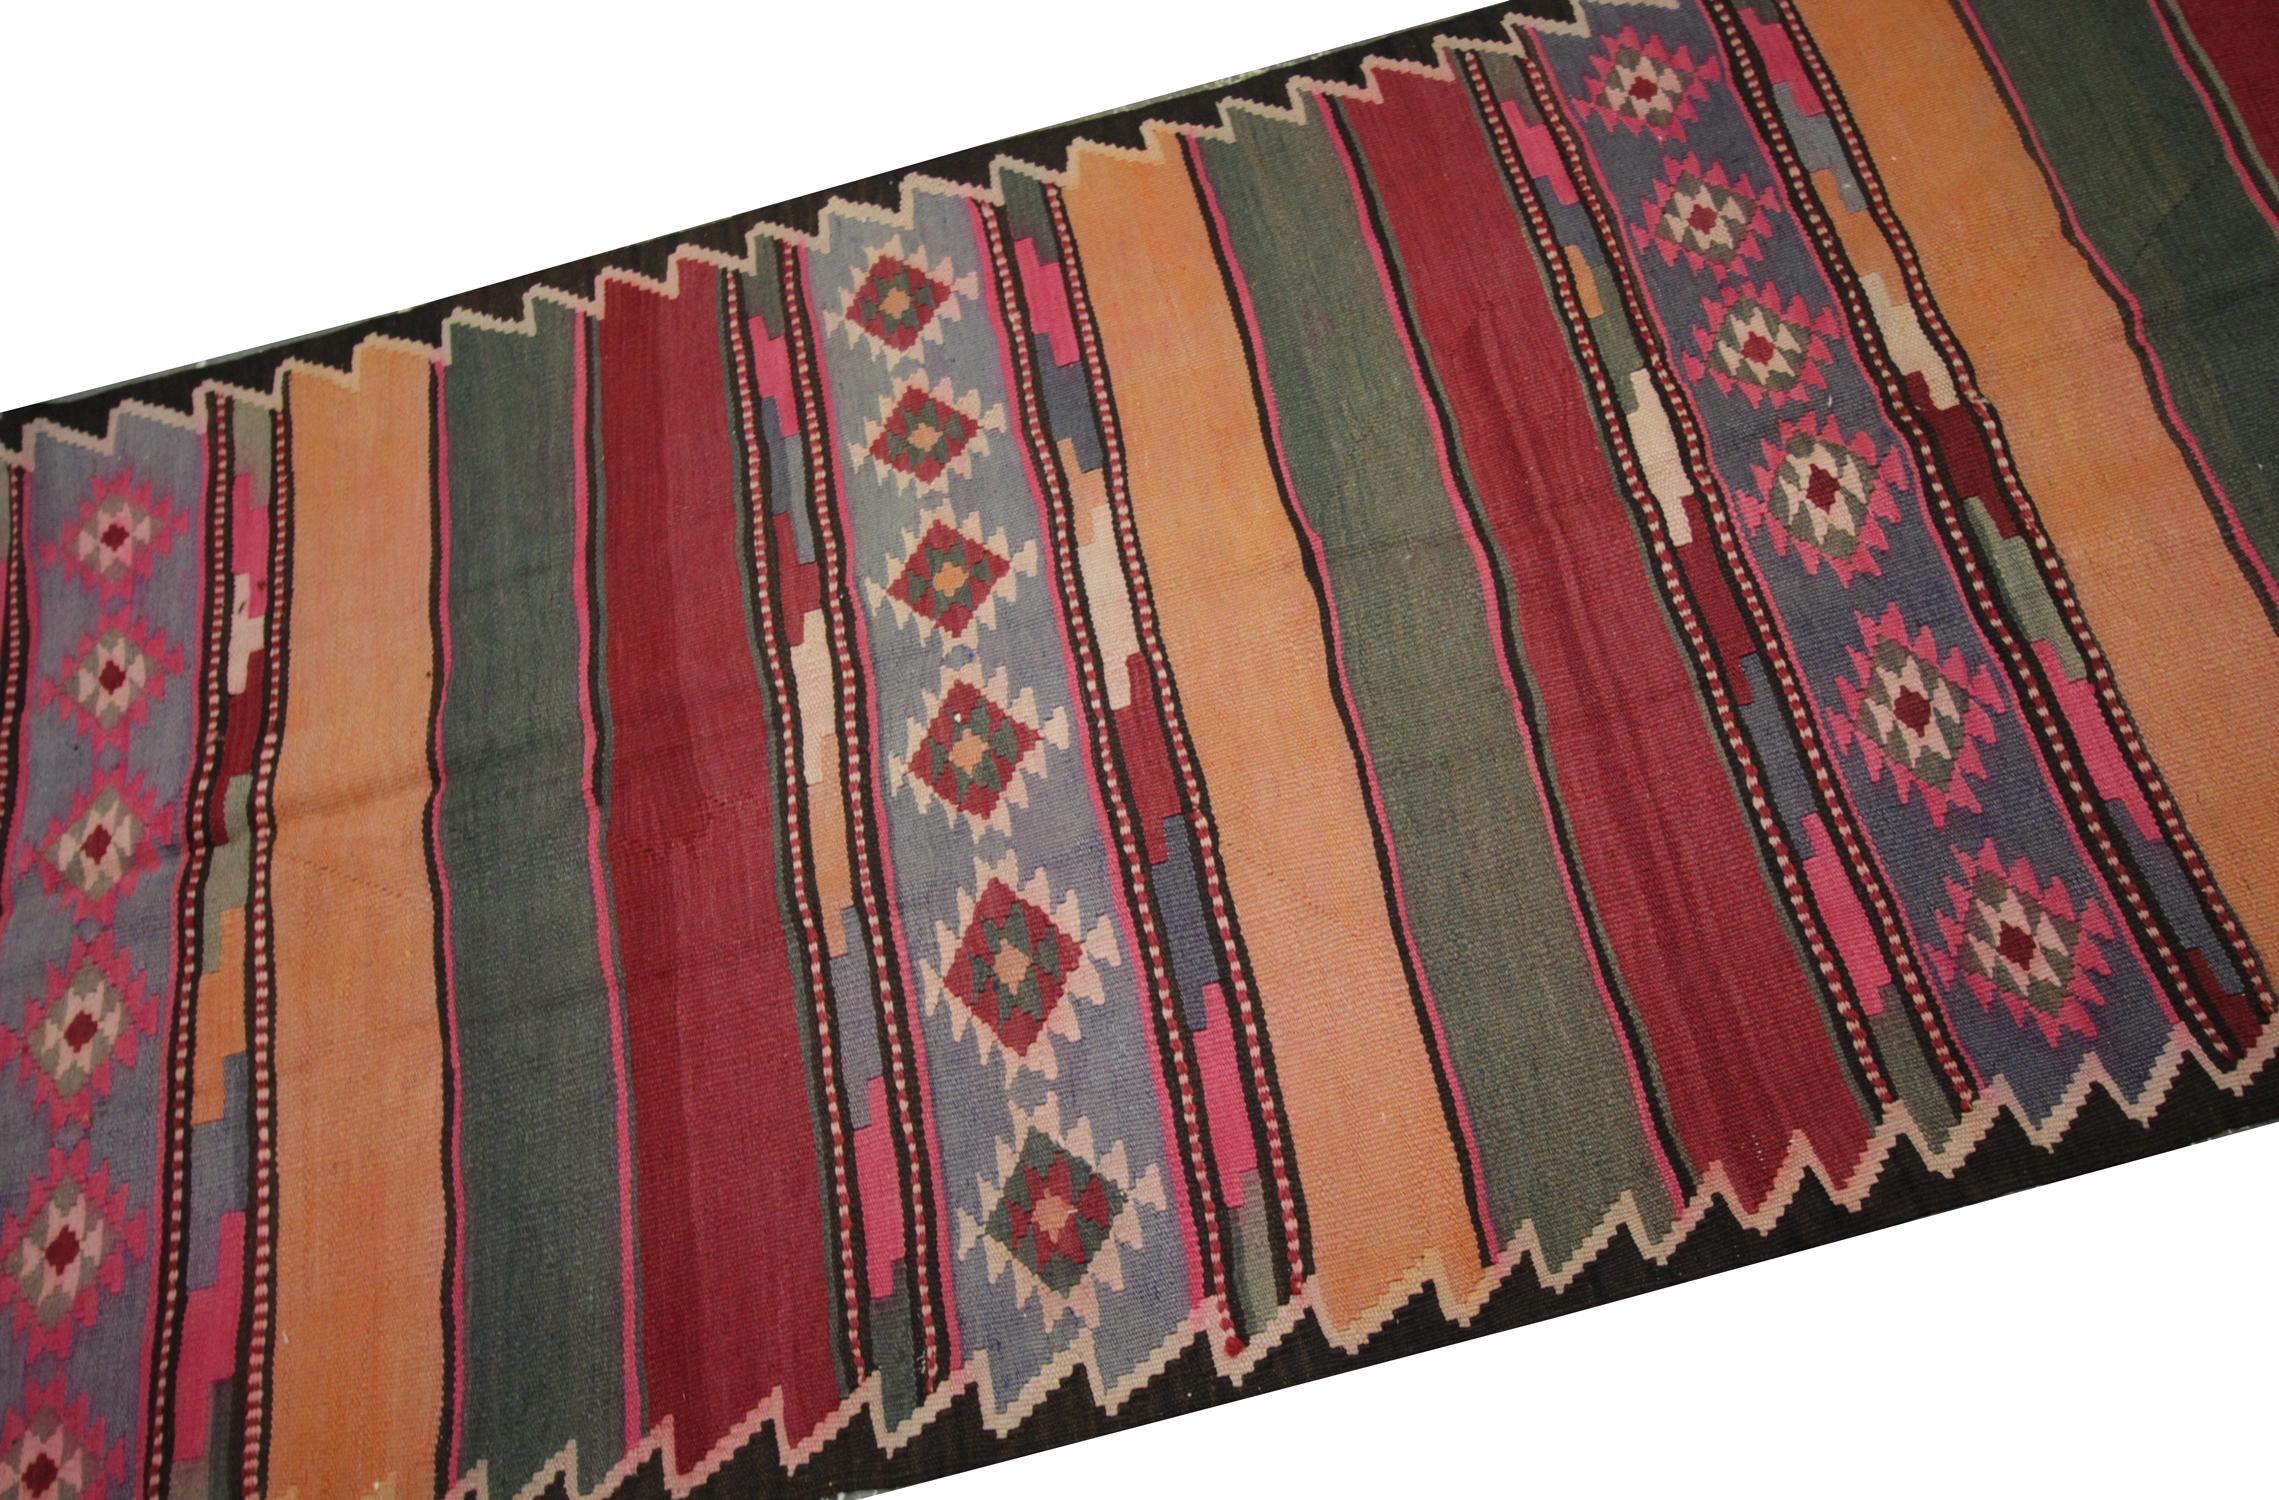 This kilim rug was woven by hand in the 1960s/70s with a simple stripe design and intertwined with purple, orange and brown, green accents in a repeating pattern. The colour palette and design make it easily matchable to both classic and